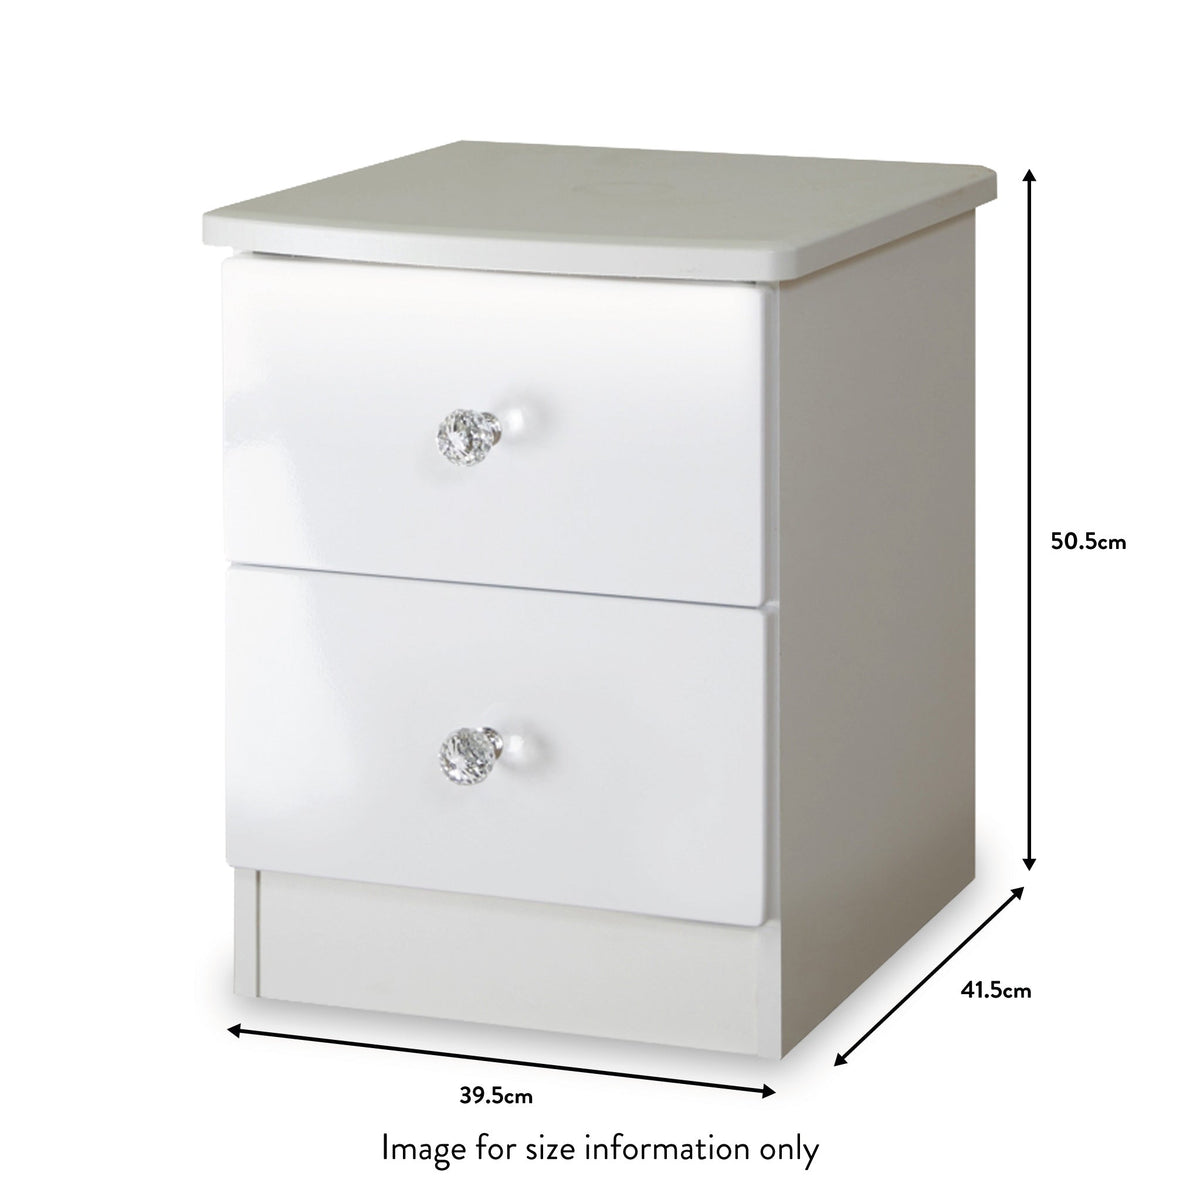 Aria White Gloss LED Lighting 2 Drawer Bedside Table dimensions